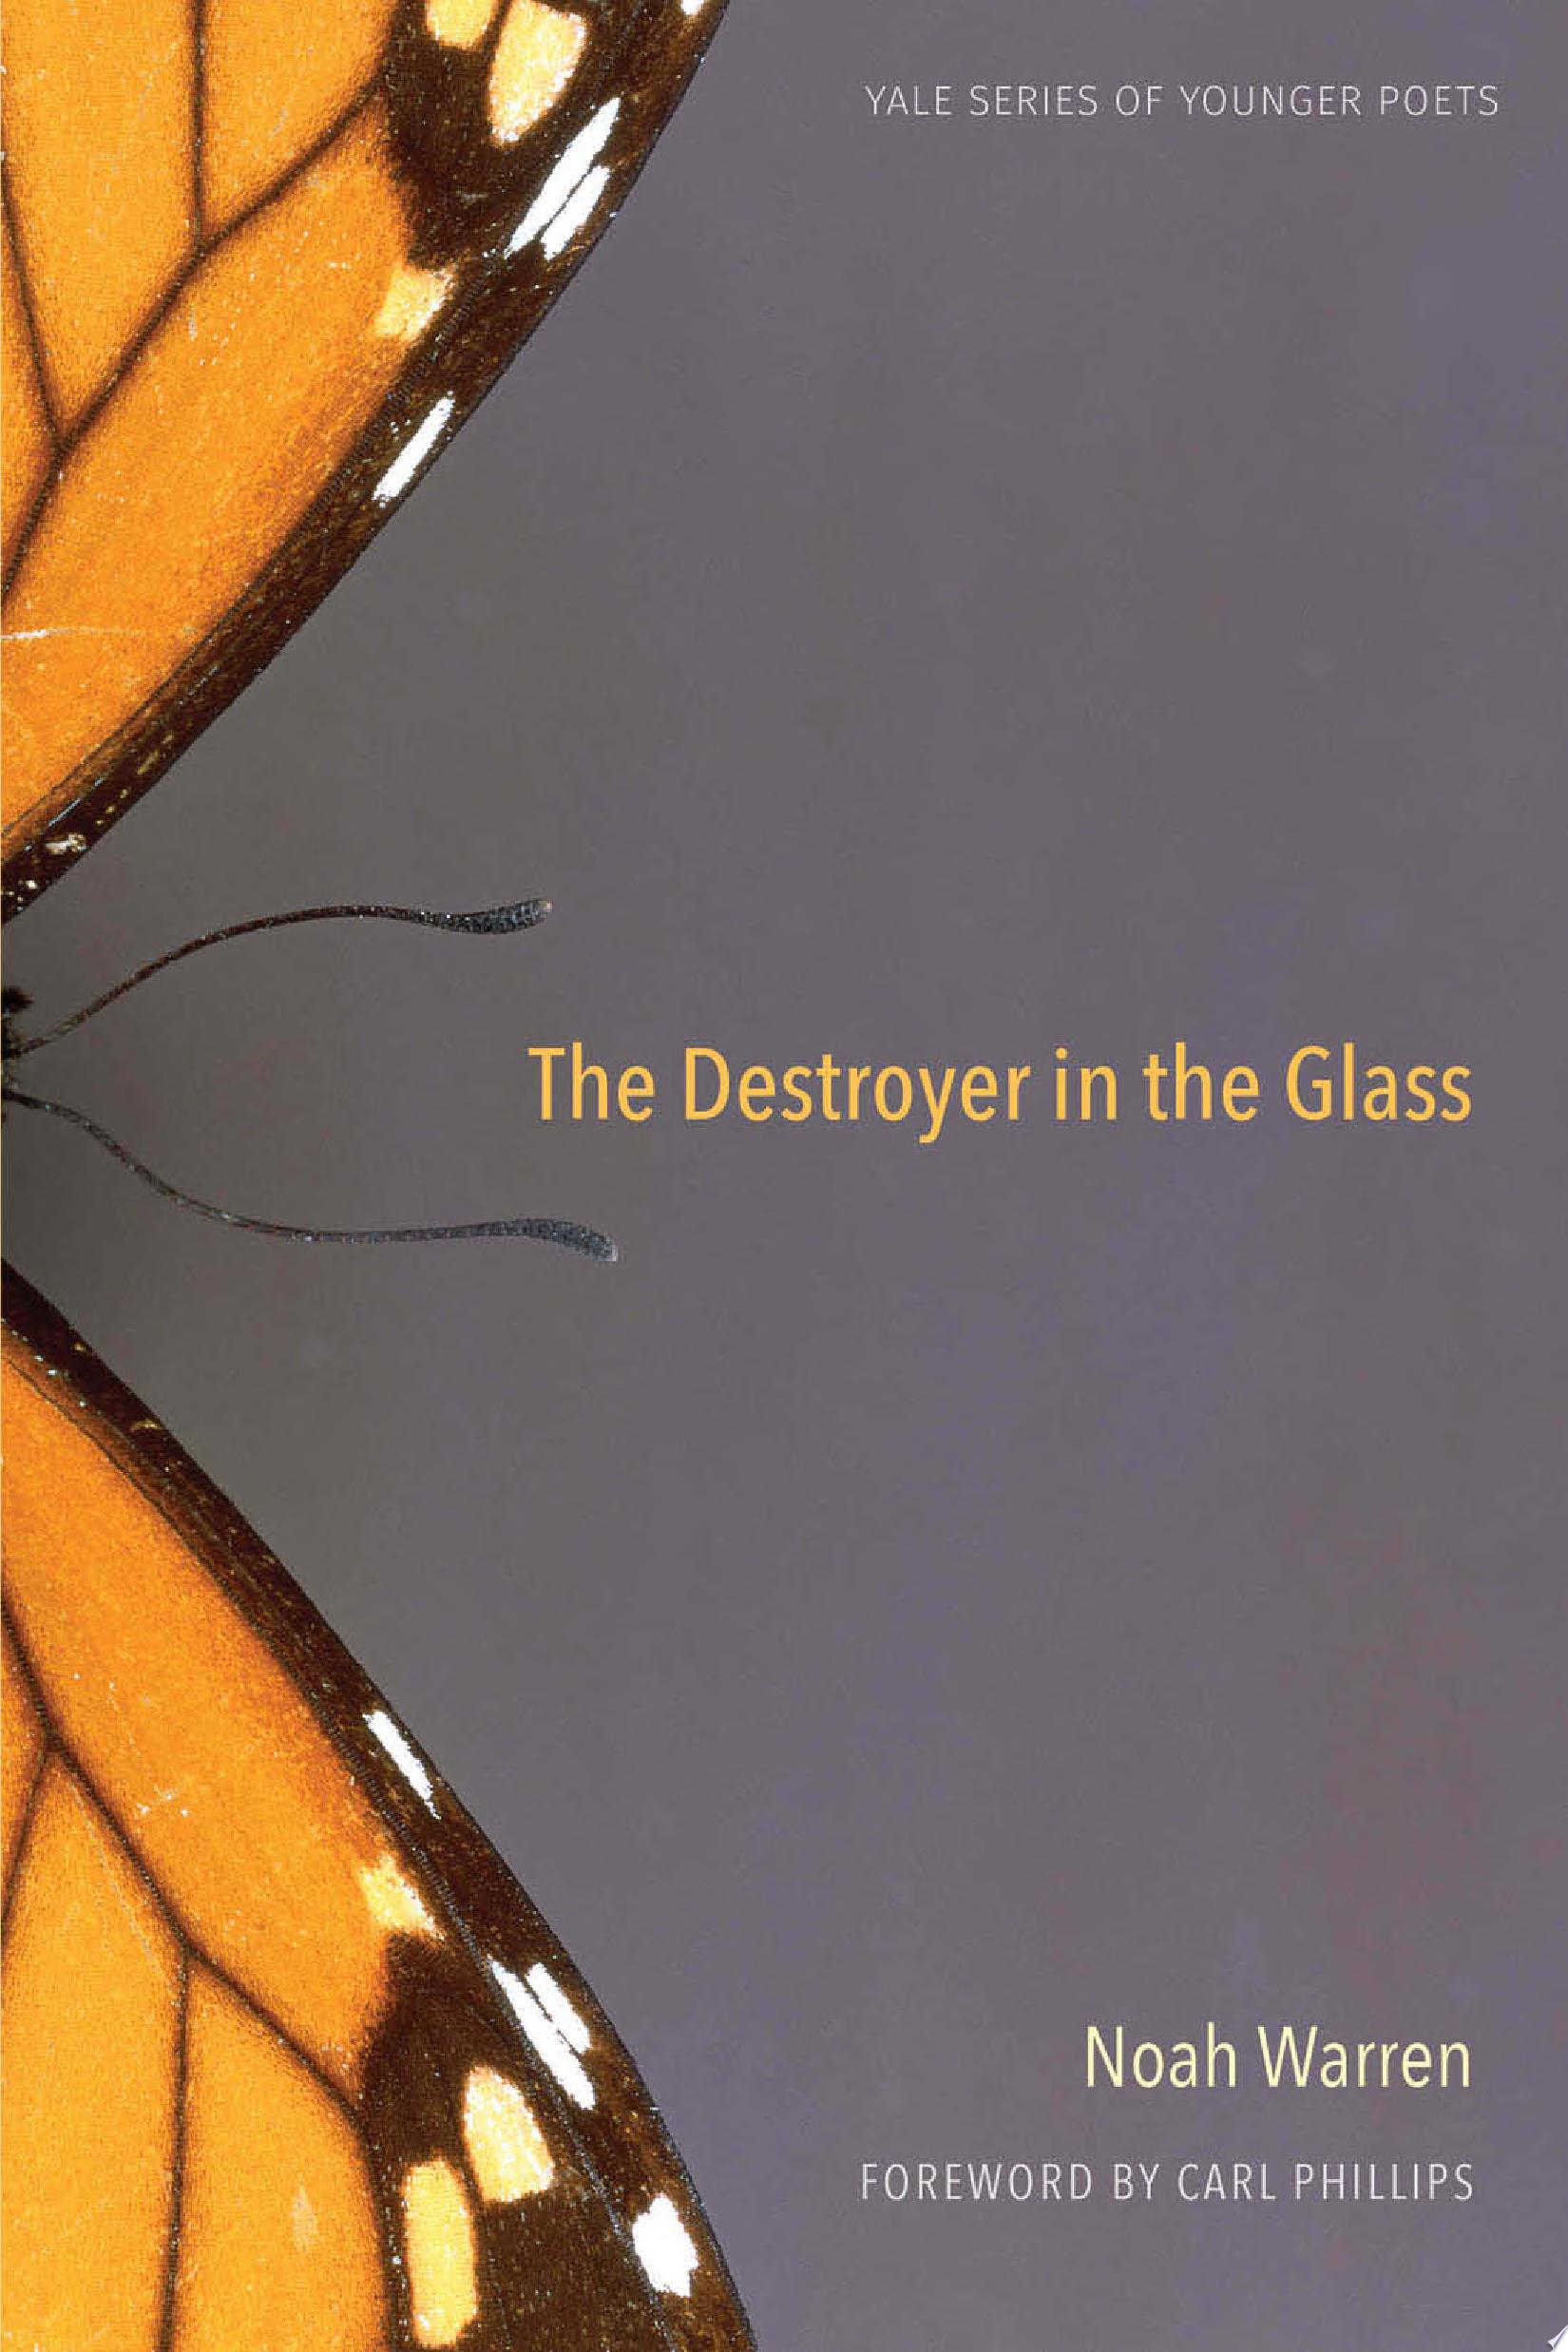 Image for "The Destroyer in the Glass"